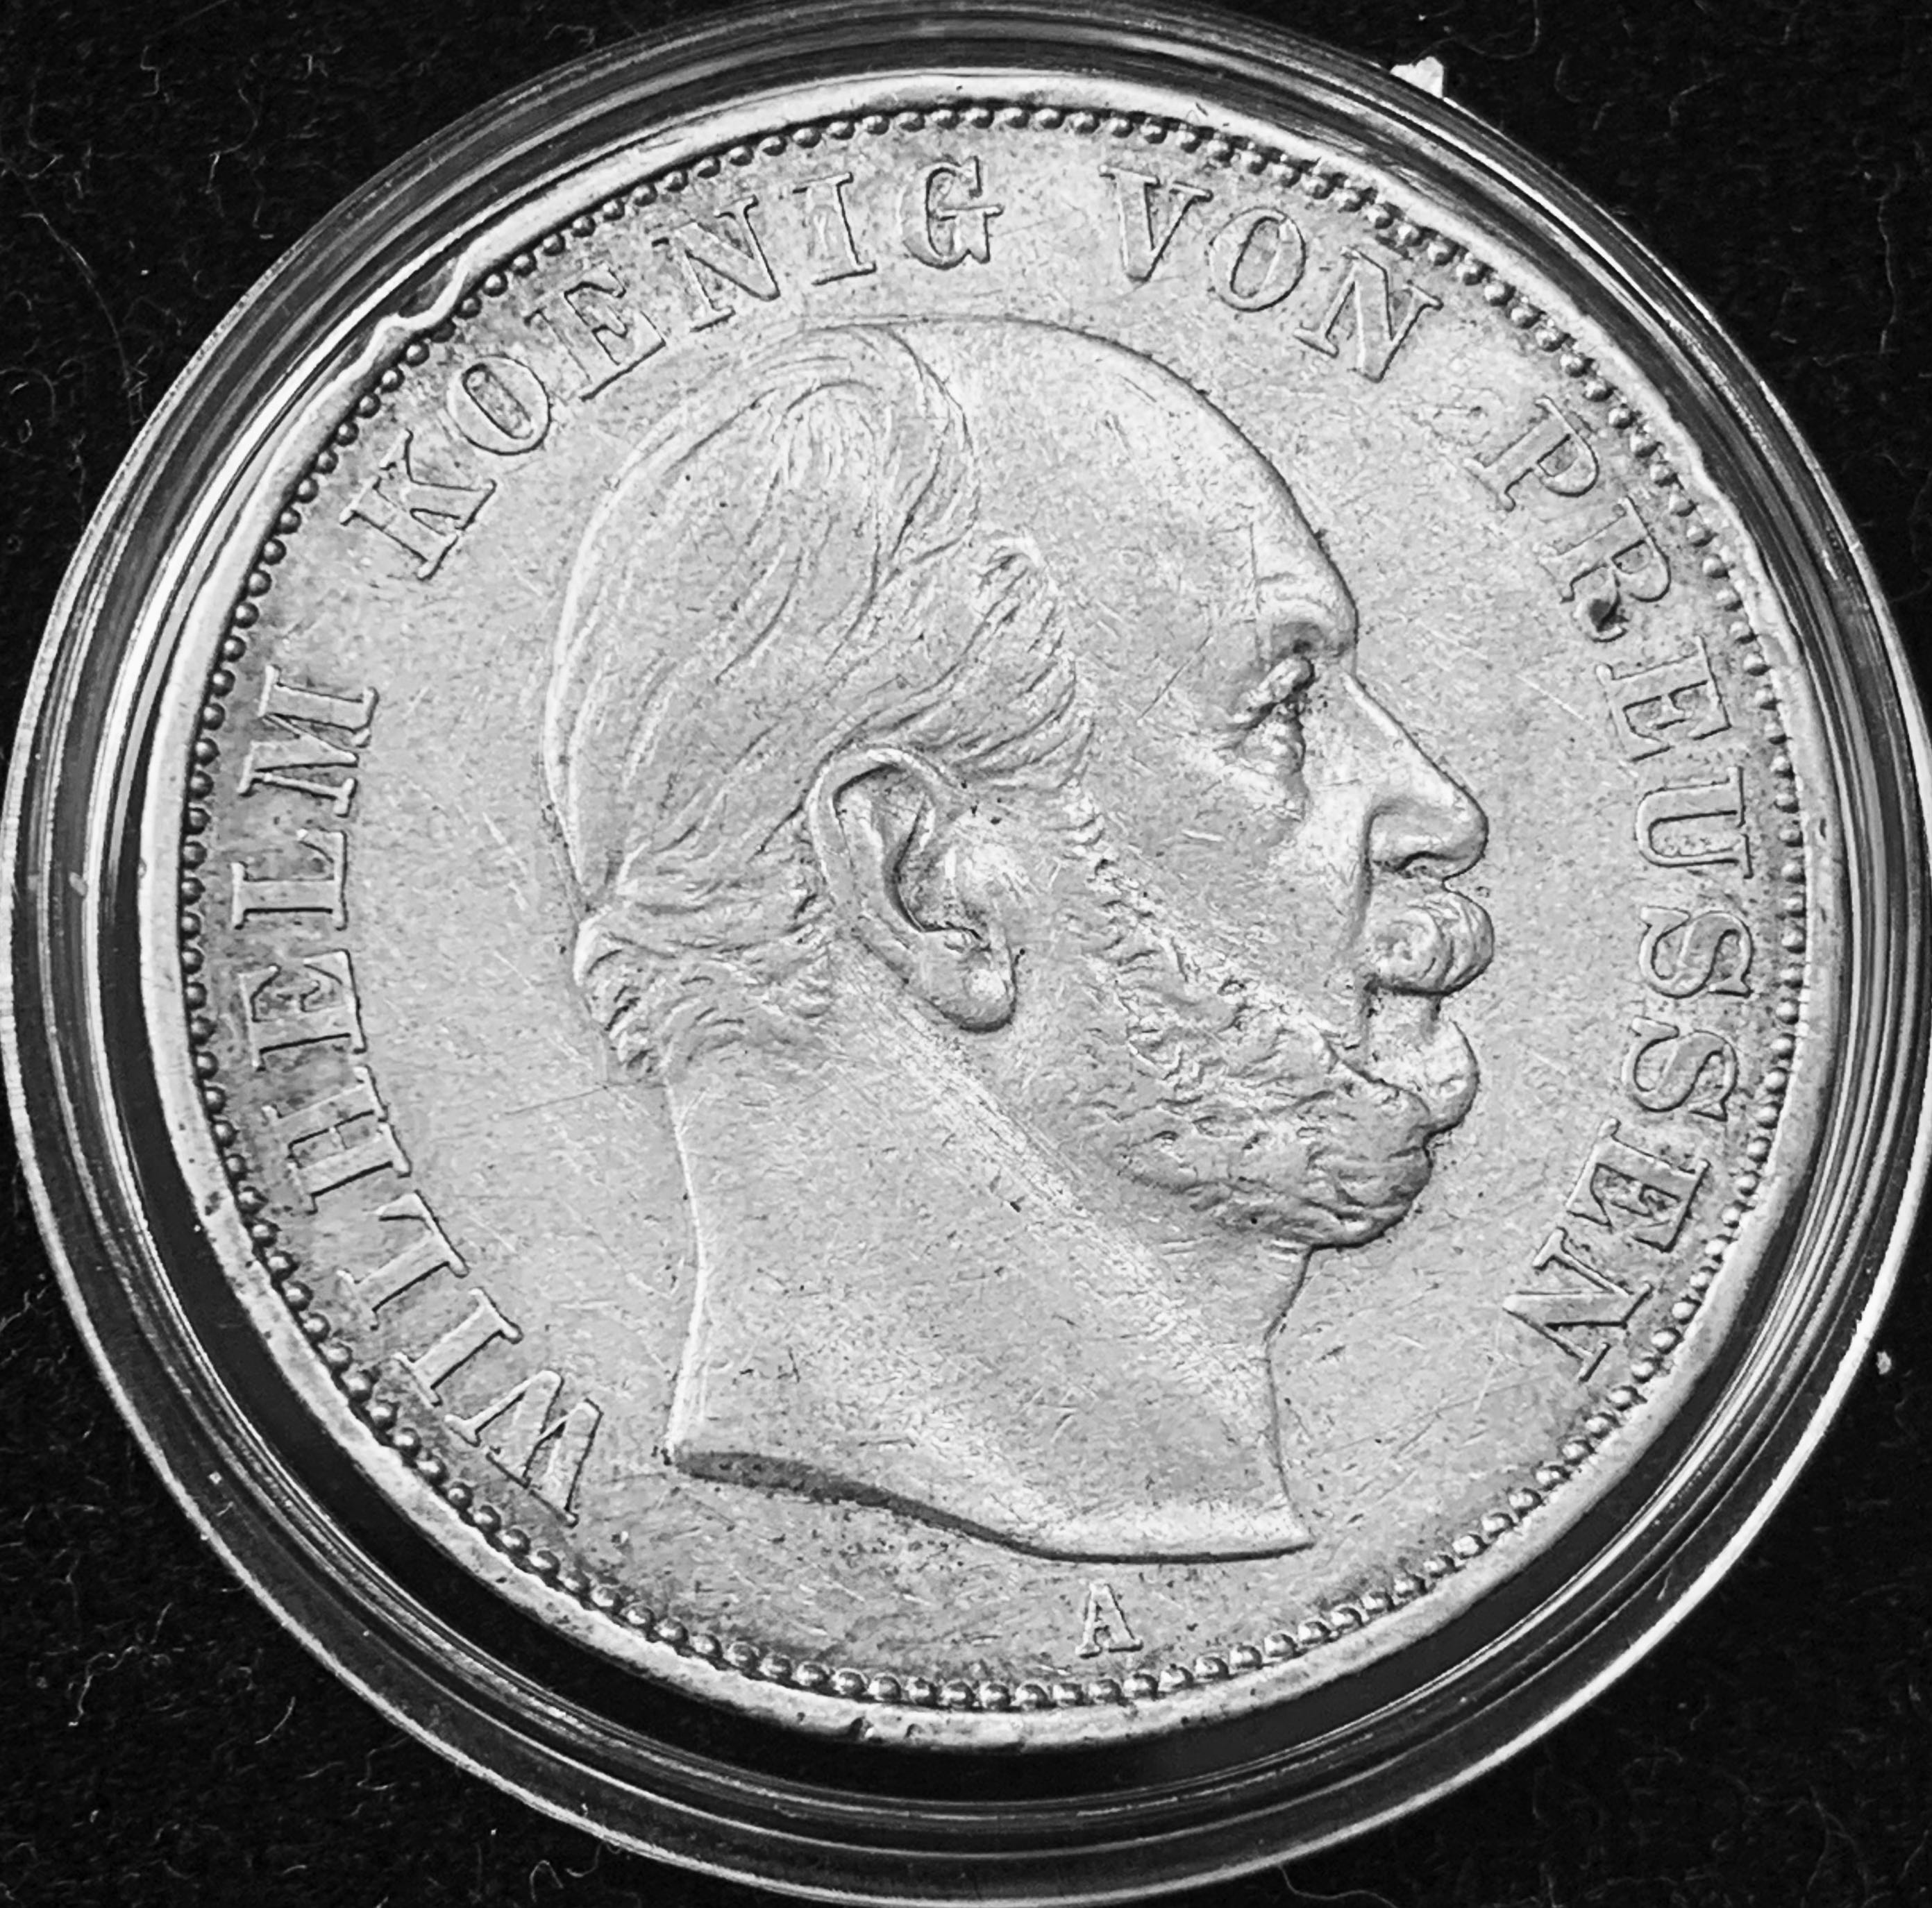 1871-A Old German Empire, German States - Kingdom Prussia Kaiser Frederick  William IV Victory over France ONE 1-Siegestaler Pure Silver Crown Coin.  Circulated, w. V. Clear Details! Attractive & Historical! Berlin Mint,  18.52 Grs. 34.0 mm. V. Scarce